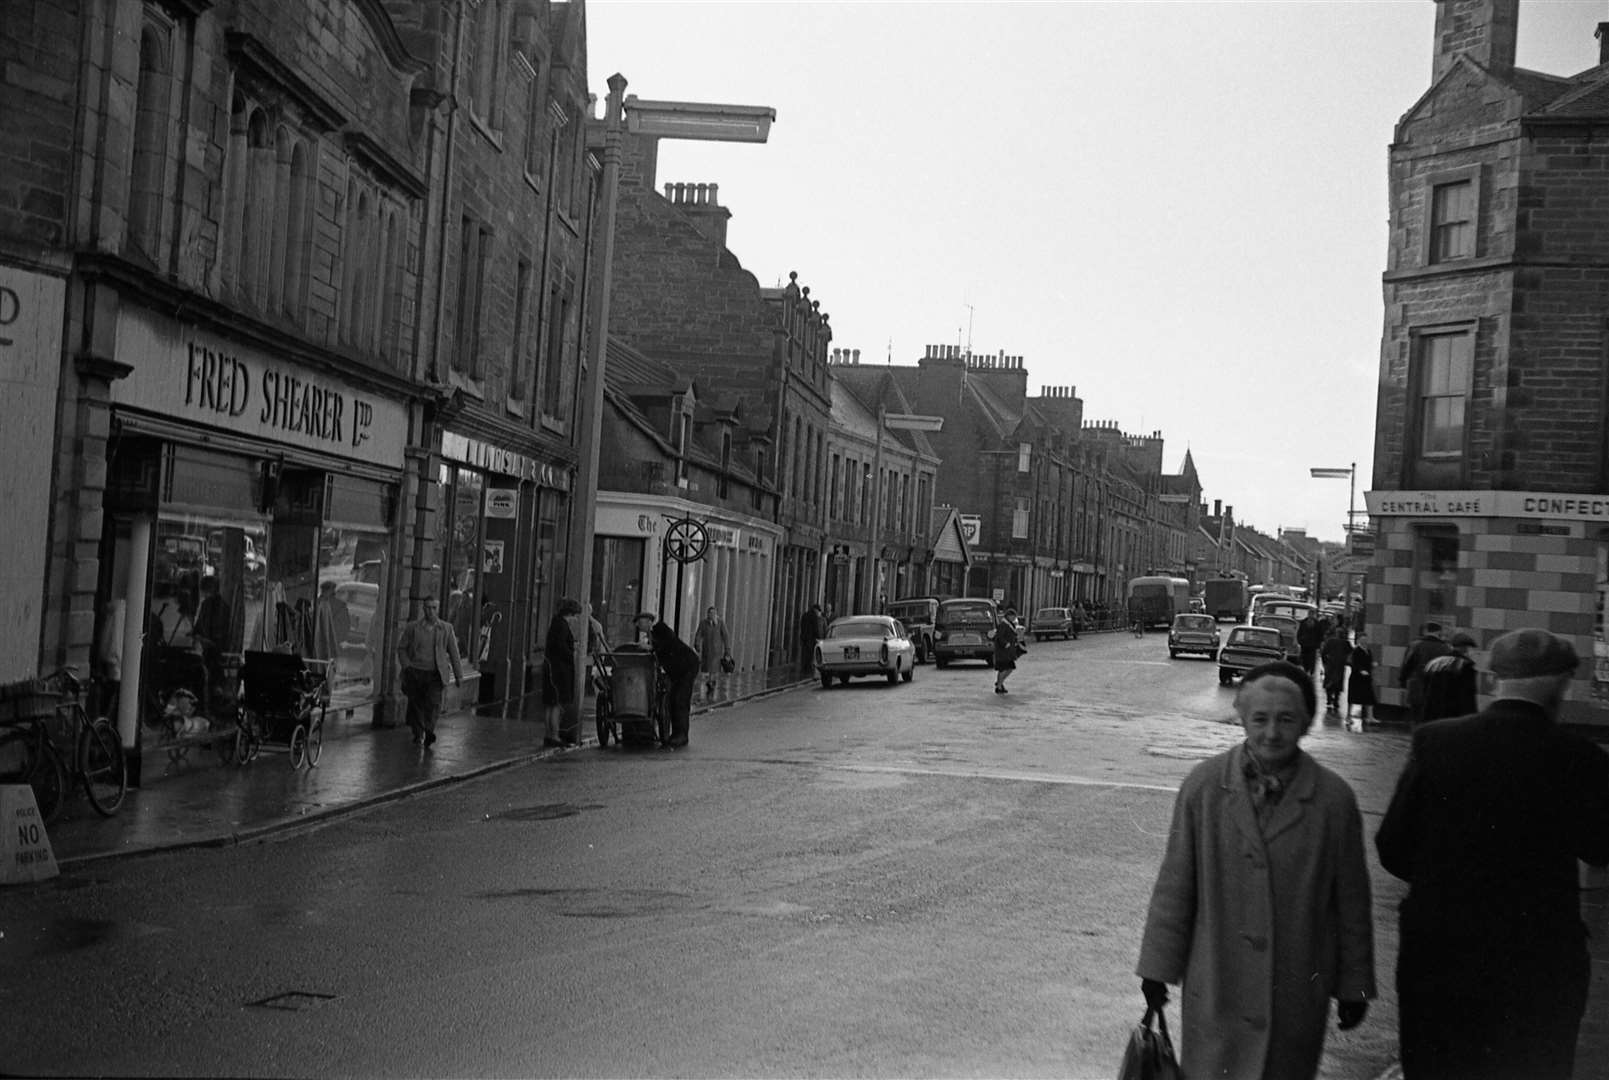 Traill Street in Thurso, with shops including Fred Shearer's, Lindsay’s and the Ship's Wheel. Jack Selby Collection / Thurso Heritage Society